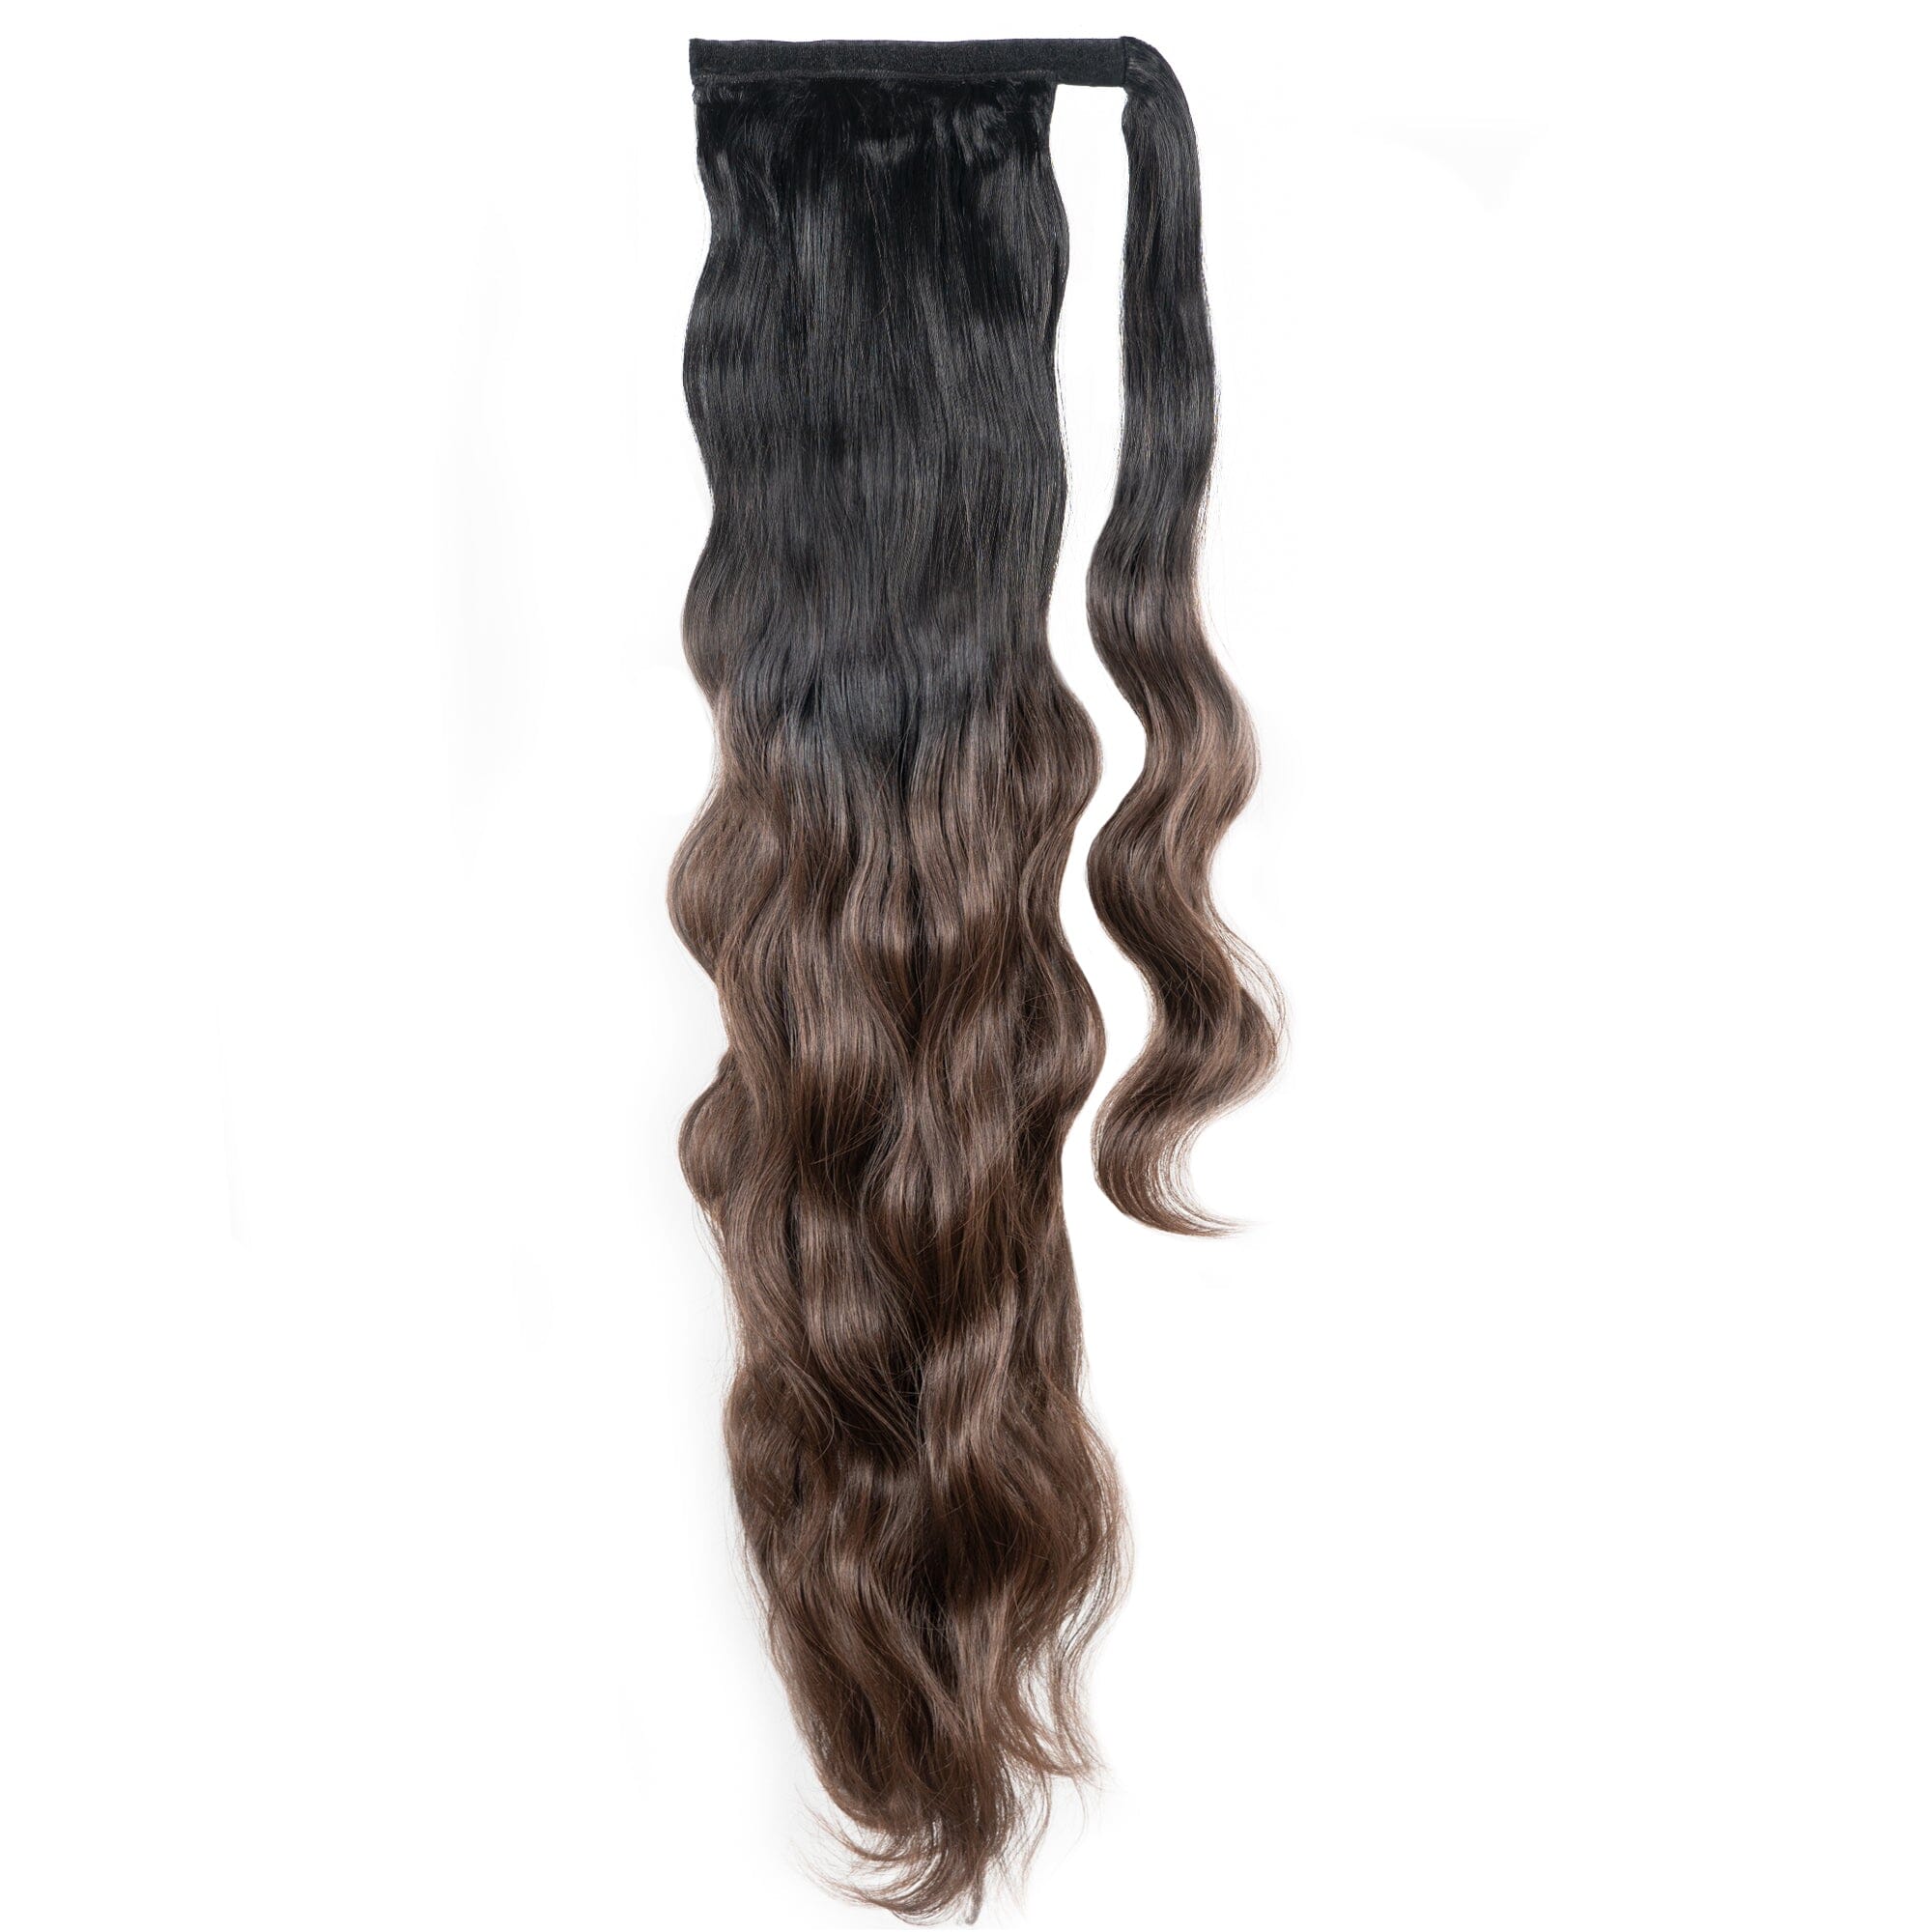 Long Clip-In Ponytails (22" - 30") Clip In Ponytail Easilocks 30"Body Wave Clip-In Ponytail Dark Brown Ombre 